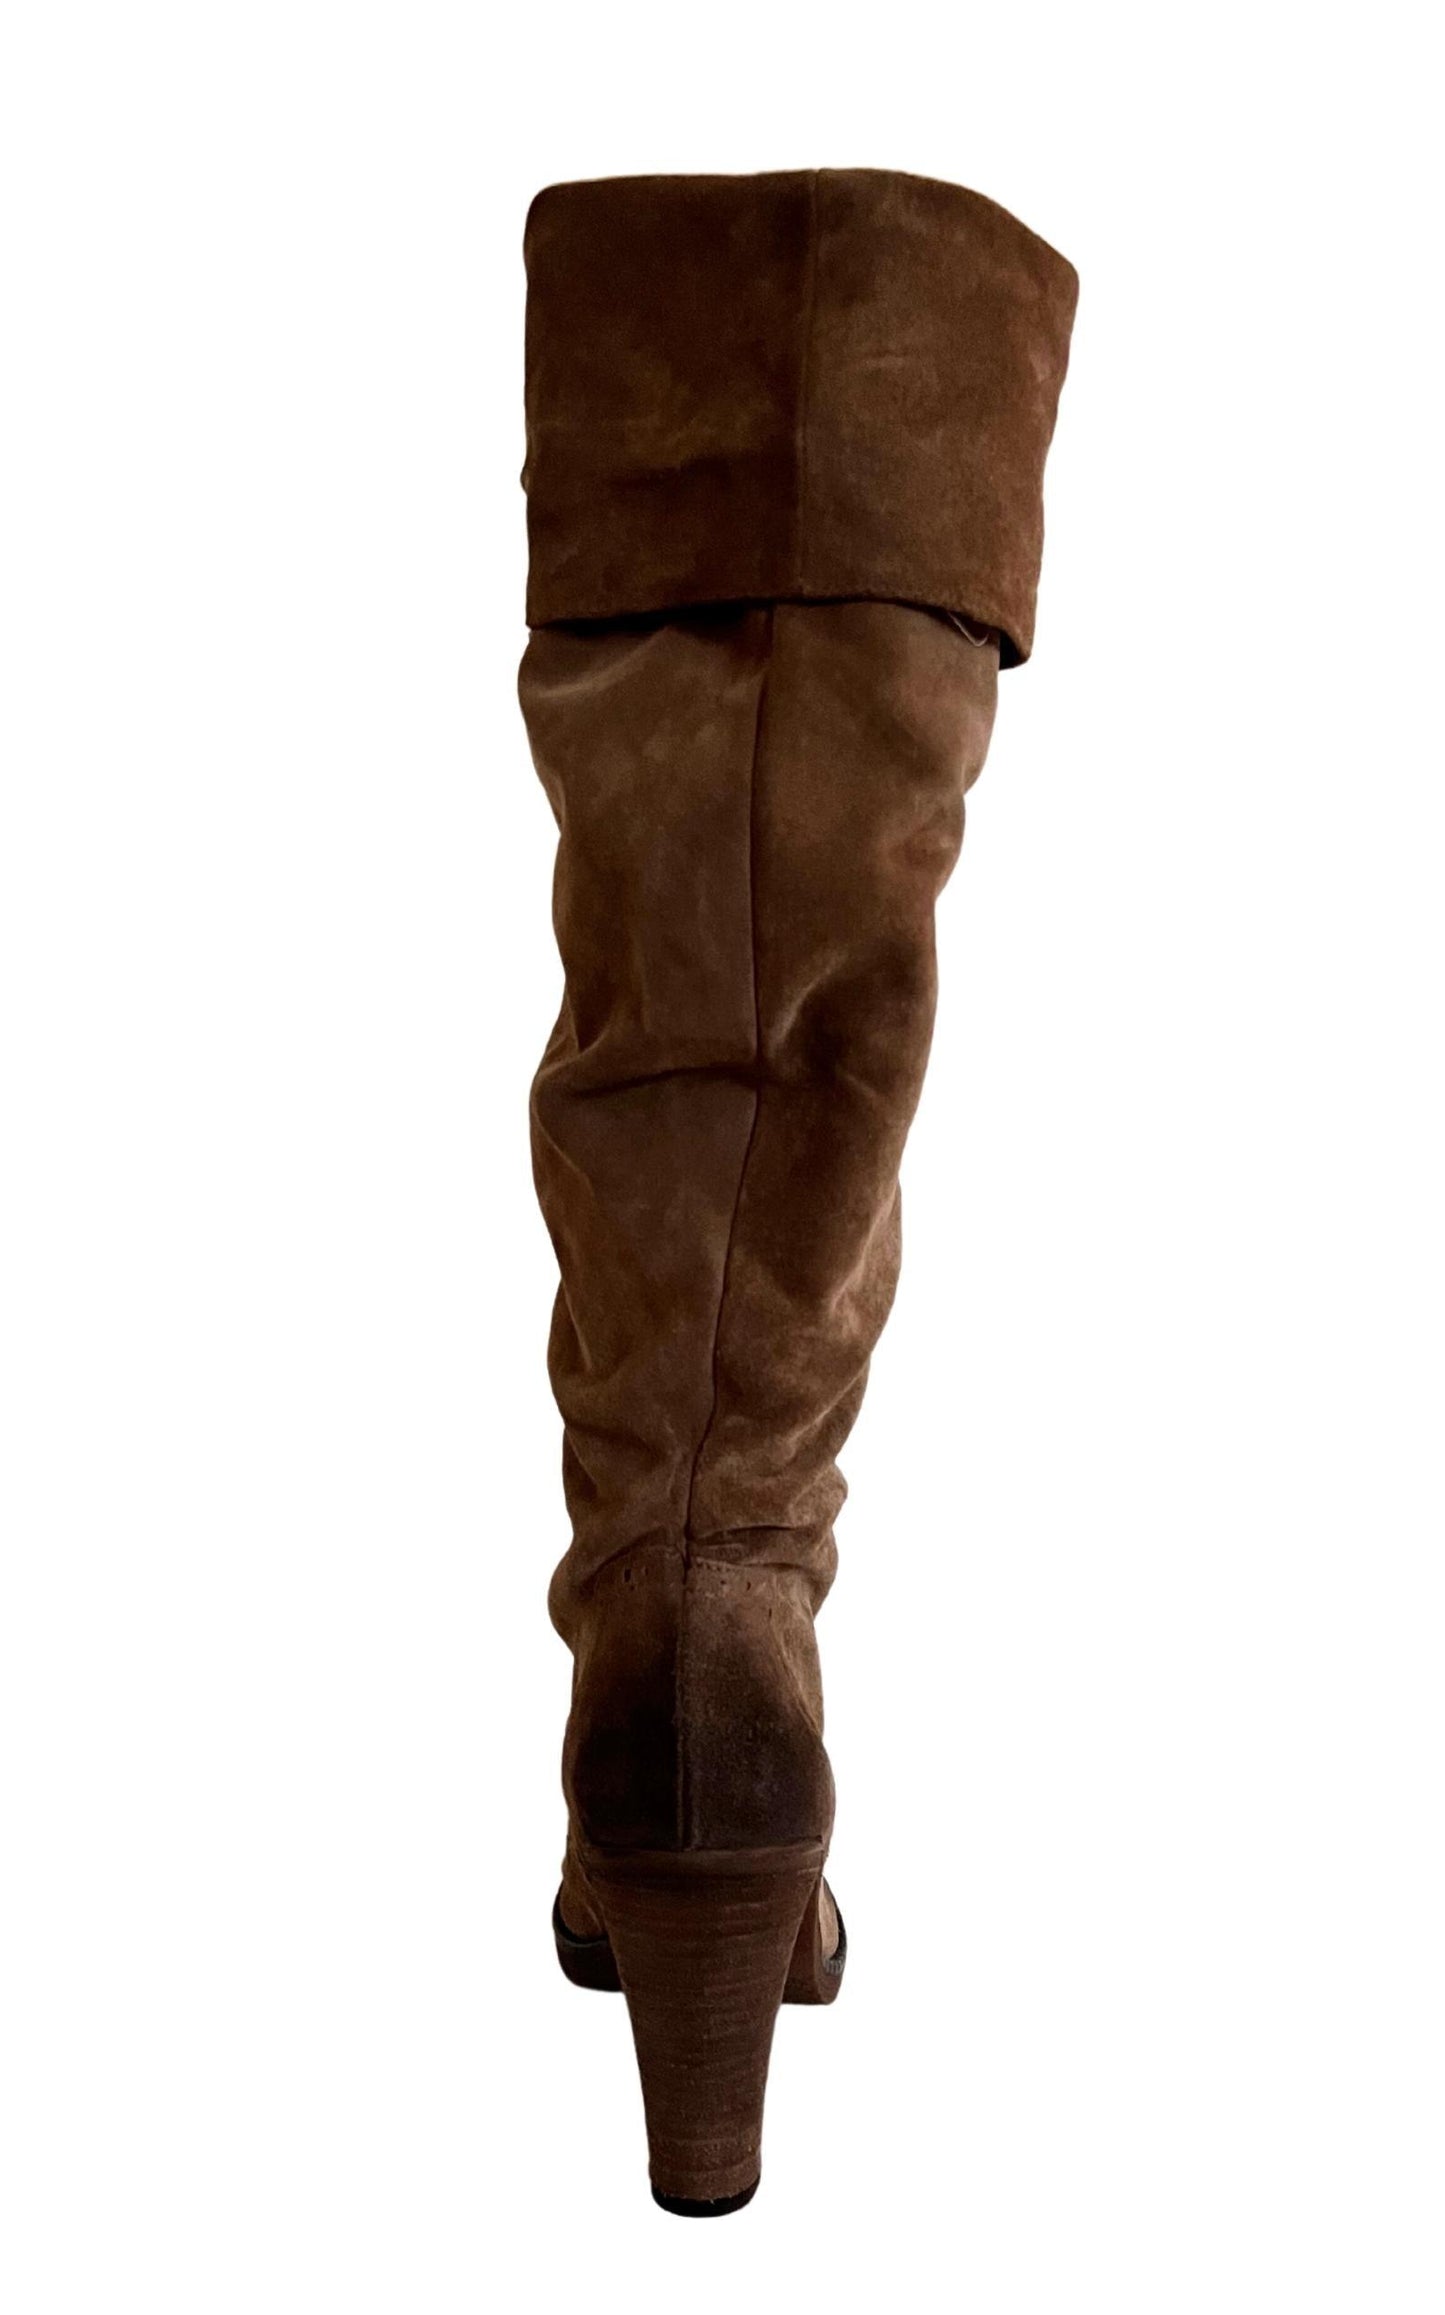 Copy of Copy of Copy of Copy of Central Brown Leather Riding Boots-Boots-BCBGMAXAZRIA-US 6.5-Brown-Leather-Runway Catalog